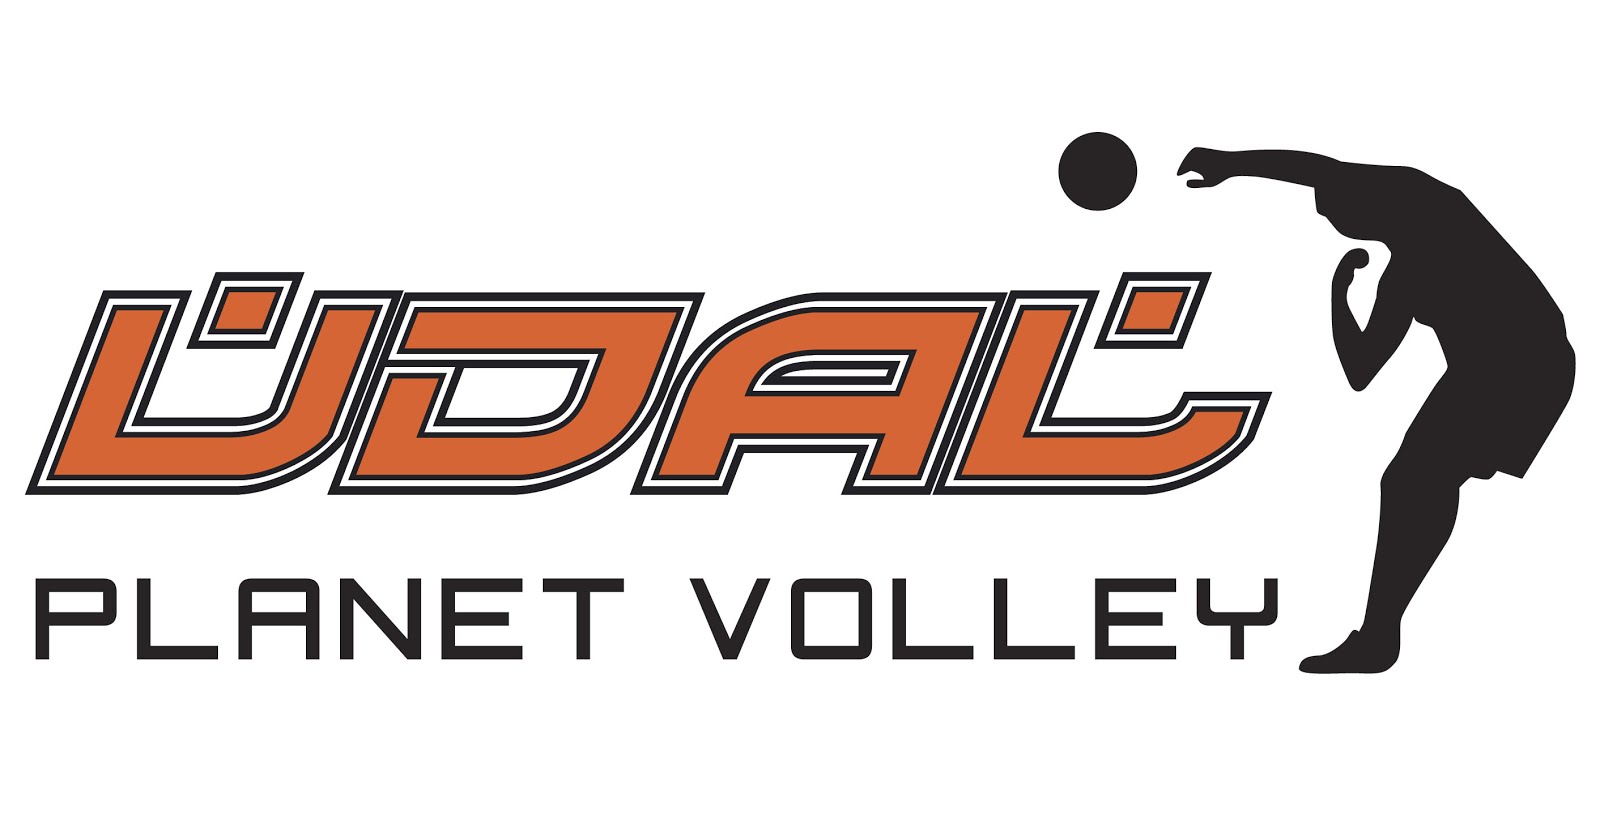 UDAL PLANET VOLLEY